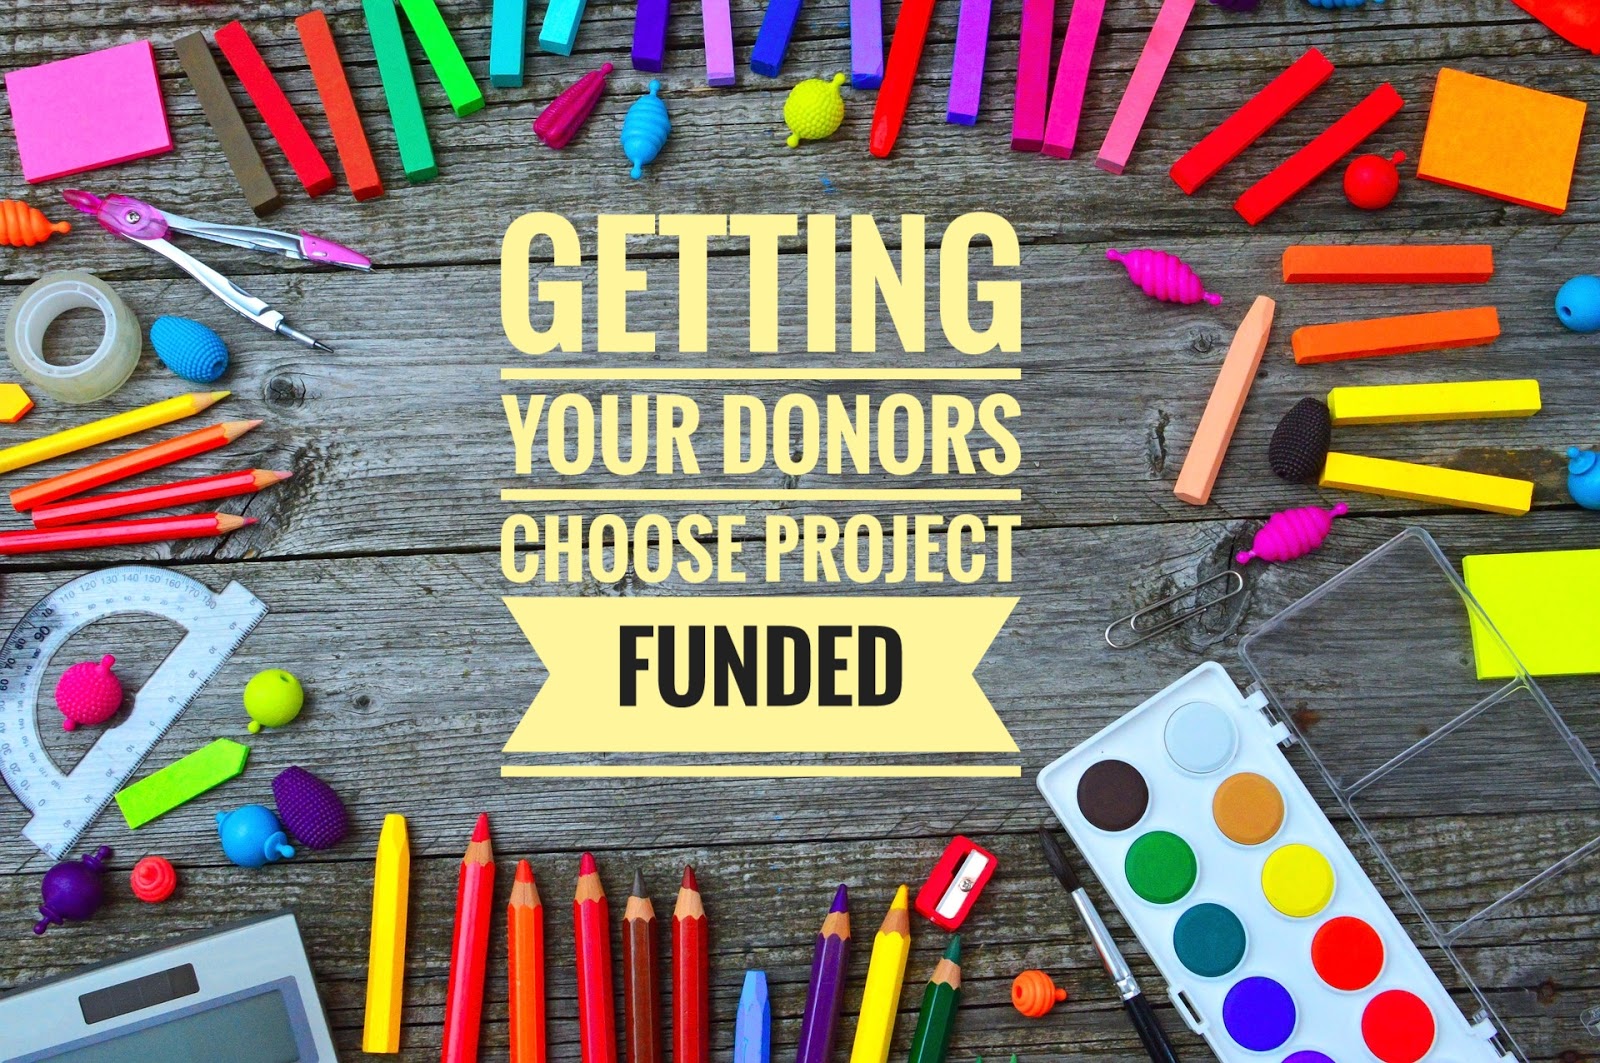 Confessions Of A Frazzled Teacher 7 Ways To Get Your Donors Choose